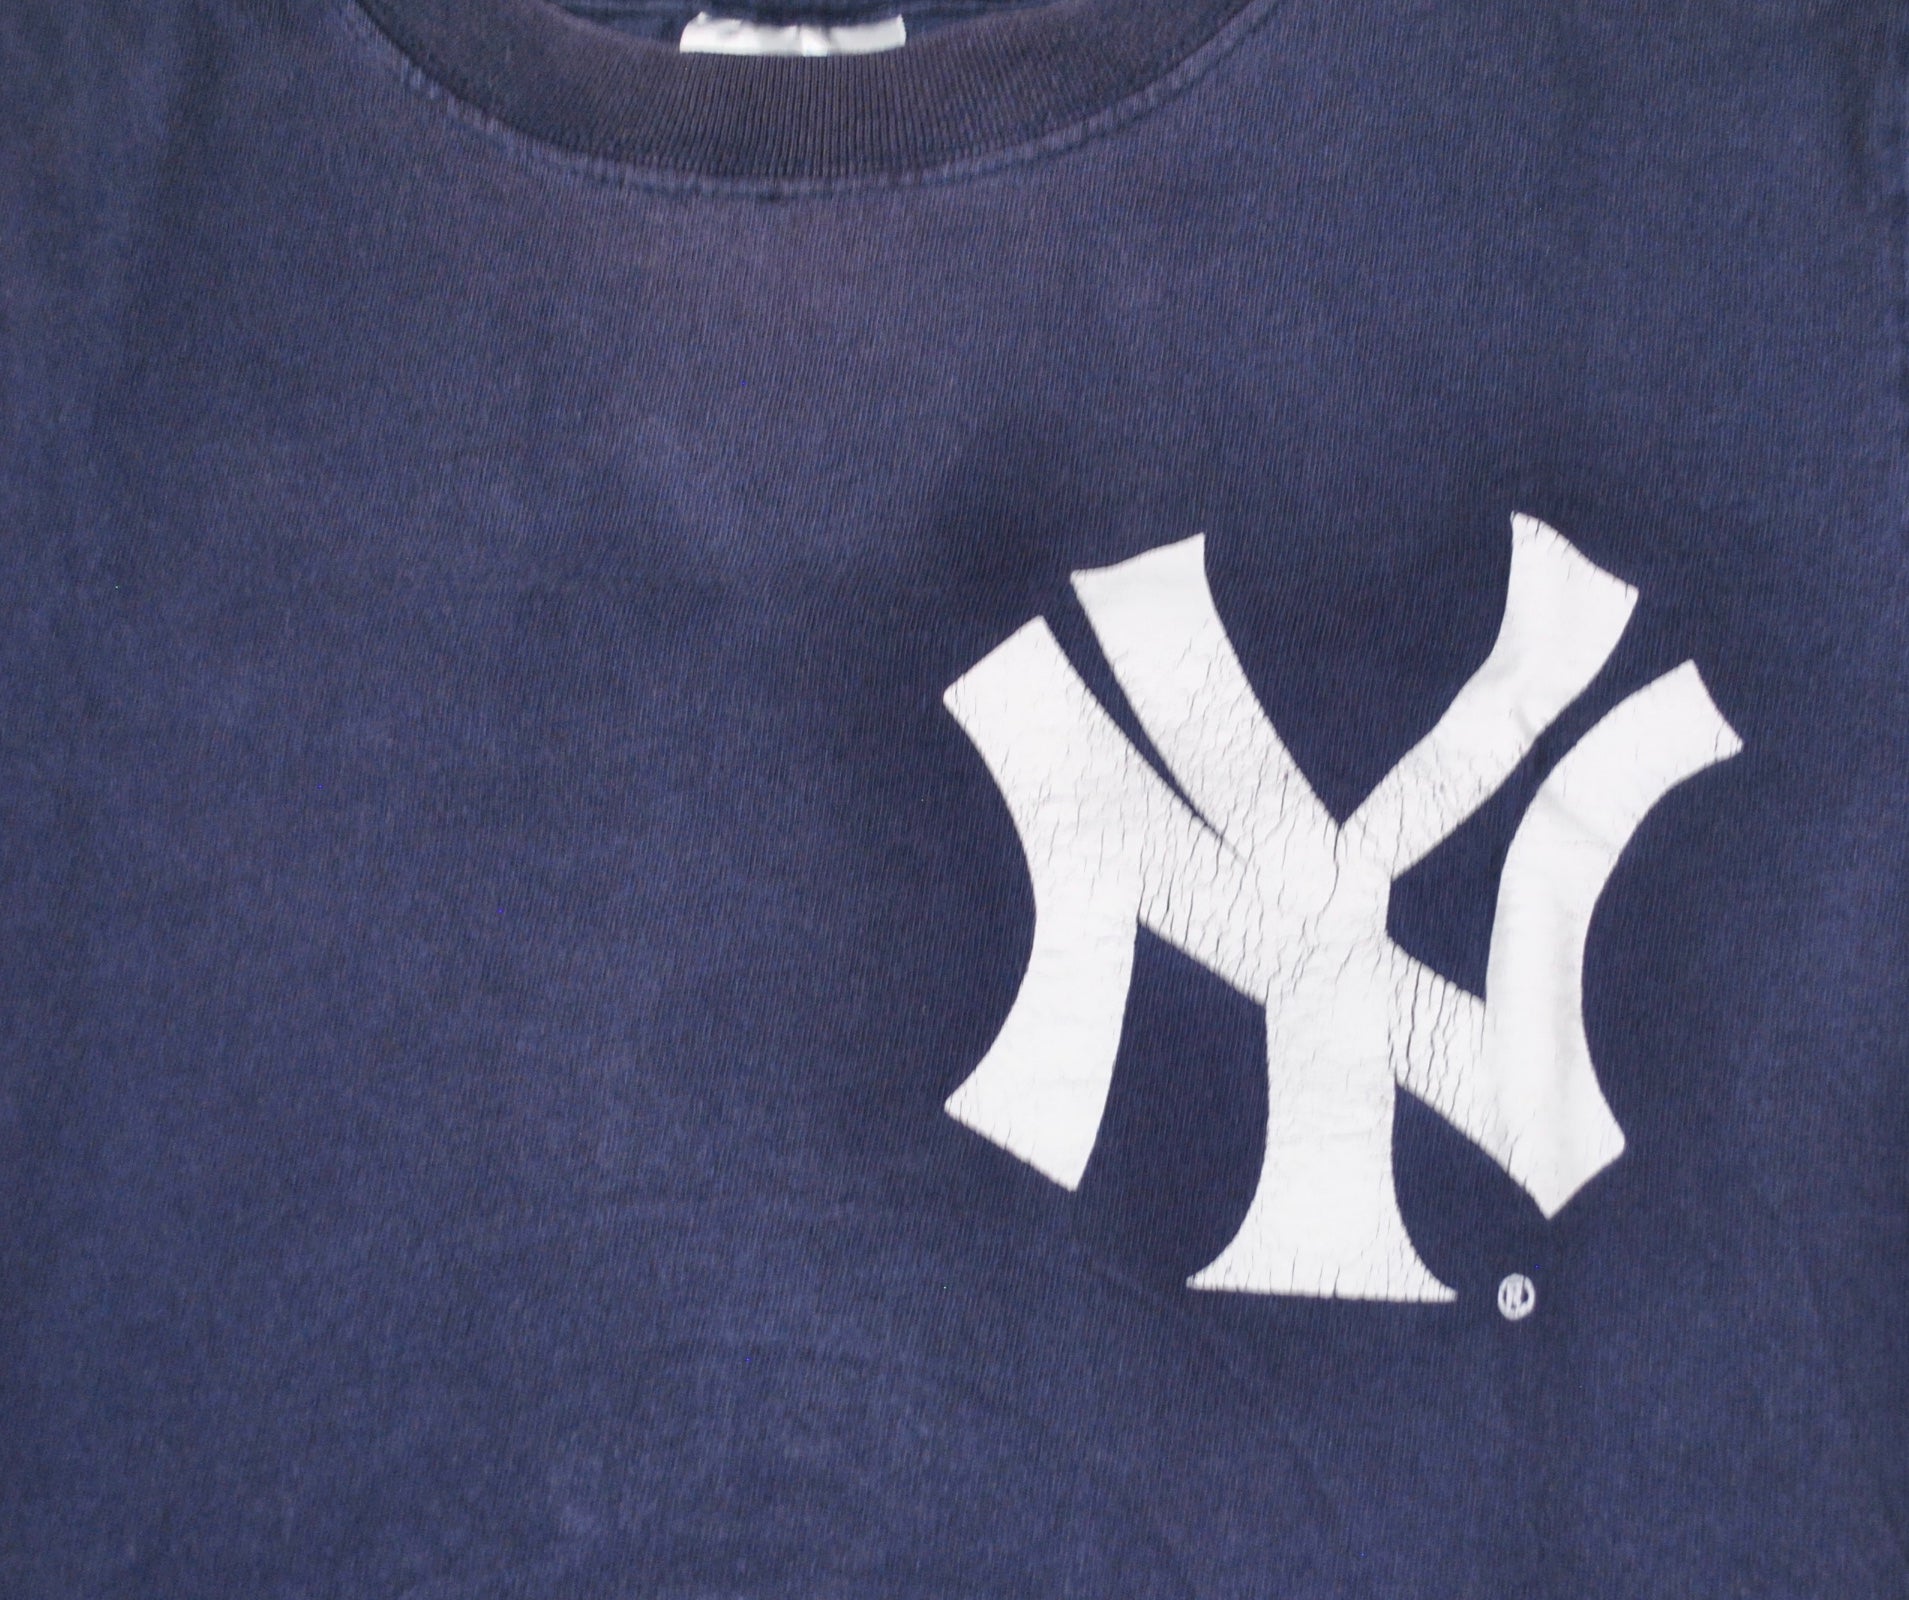 Vintage New York Yankees Practice Jersey Size 2X-Large – Yesterday's Attic